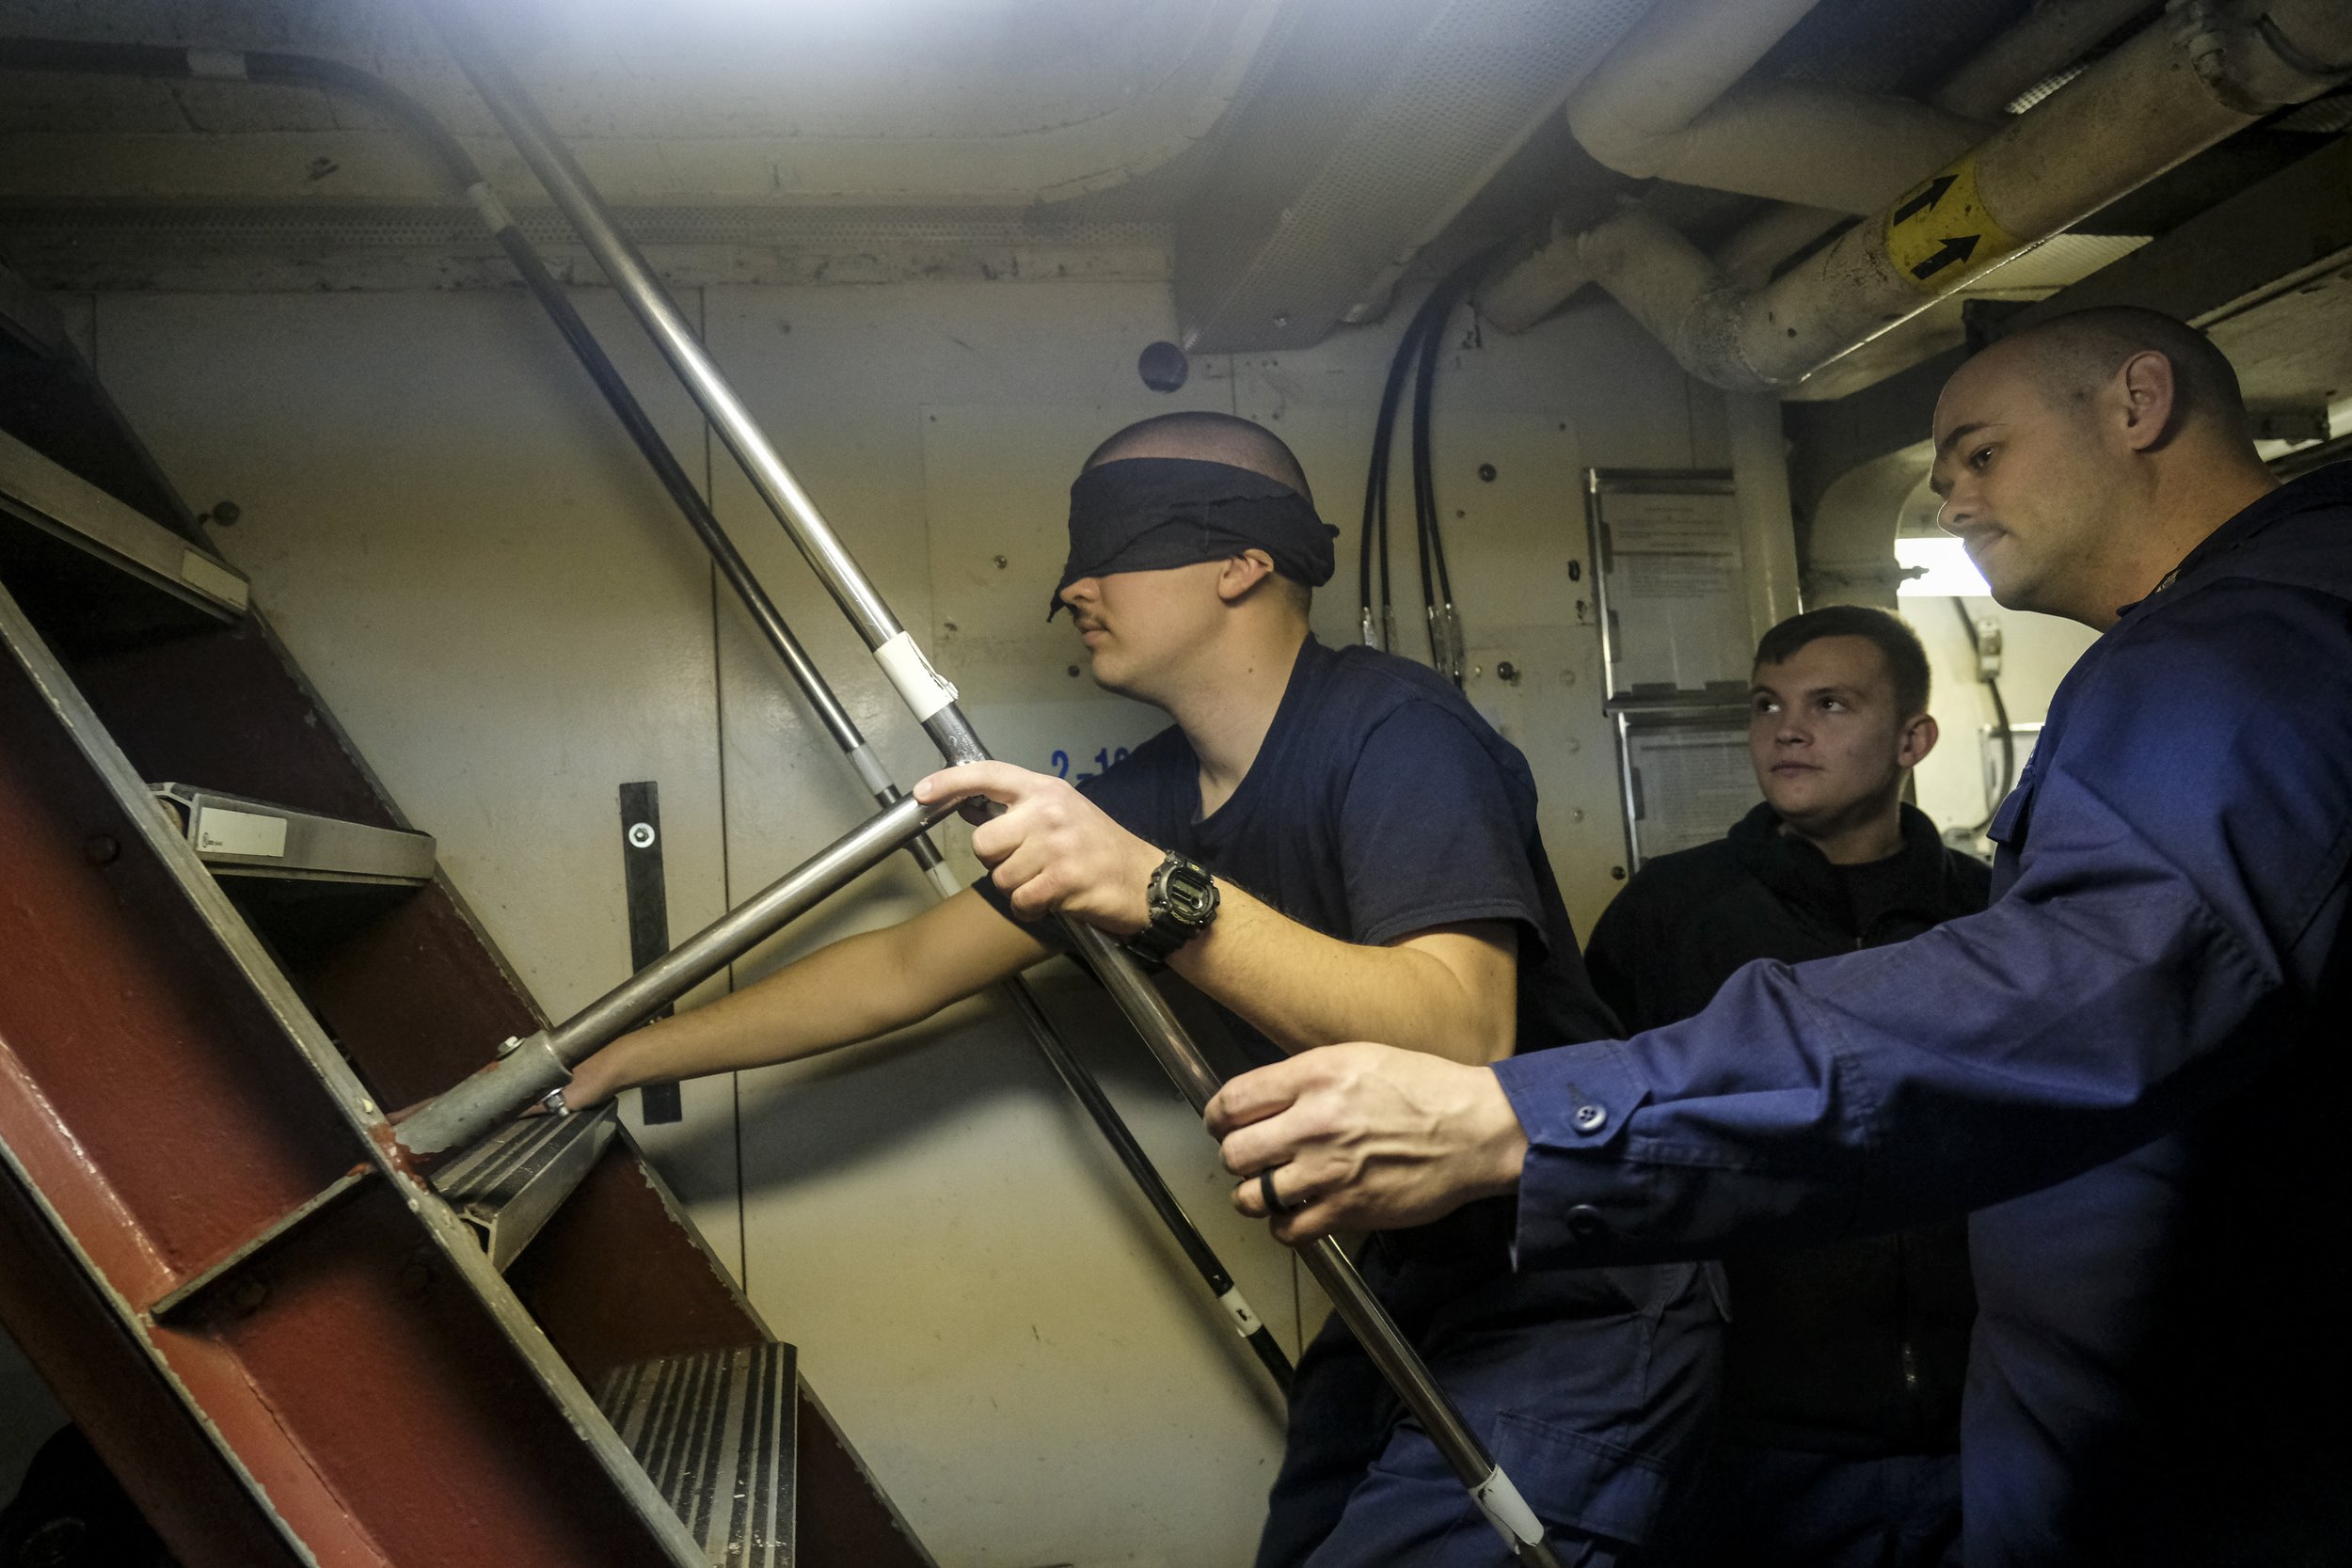  Engineer's Mate (EMC) Dawson Harris leads a blindfolded Seaman (SN) David Sherman through an evacuation drill during a lull in Ice Breaking operations aboard US Coast Guard Cutter  'Katmai Bay' to clear a Frozen  section of the St. Mary's river on M